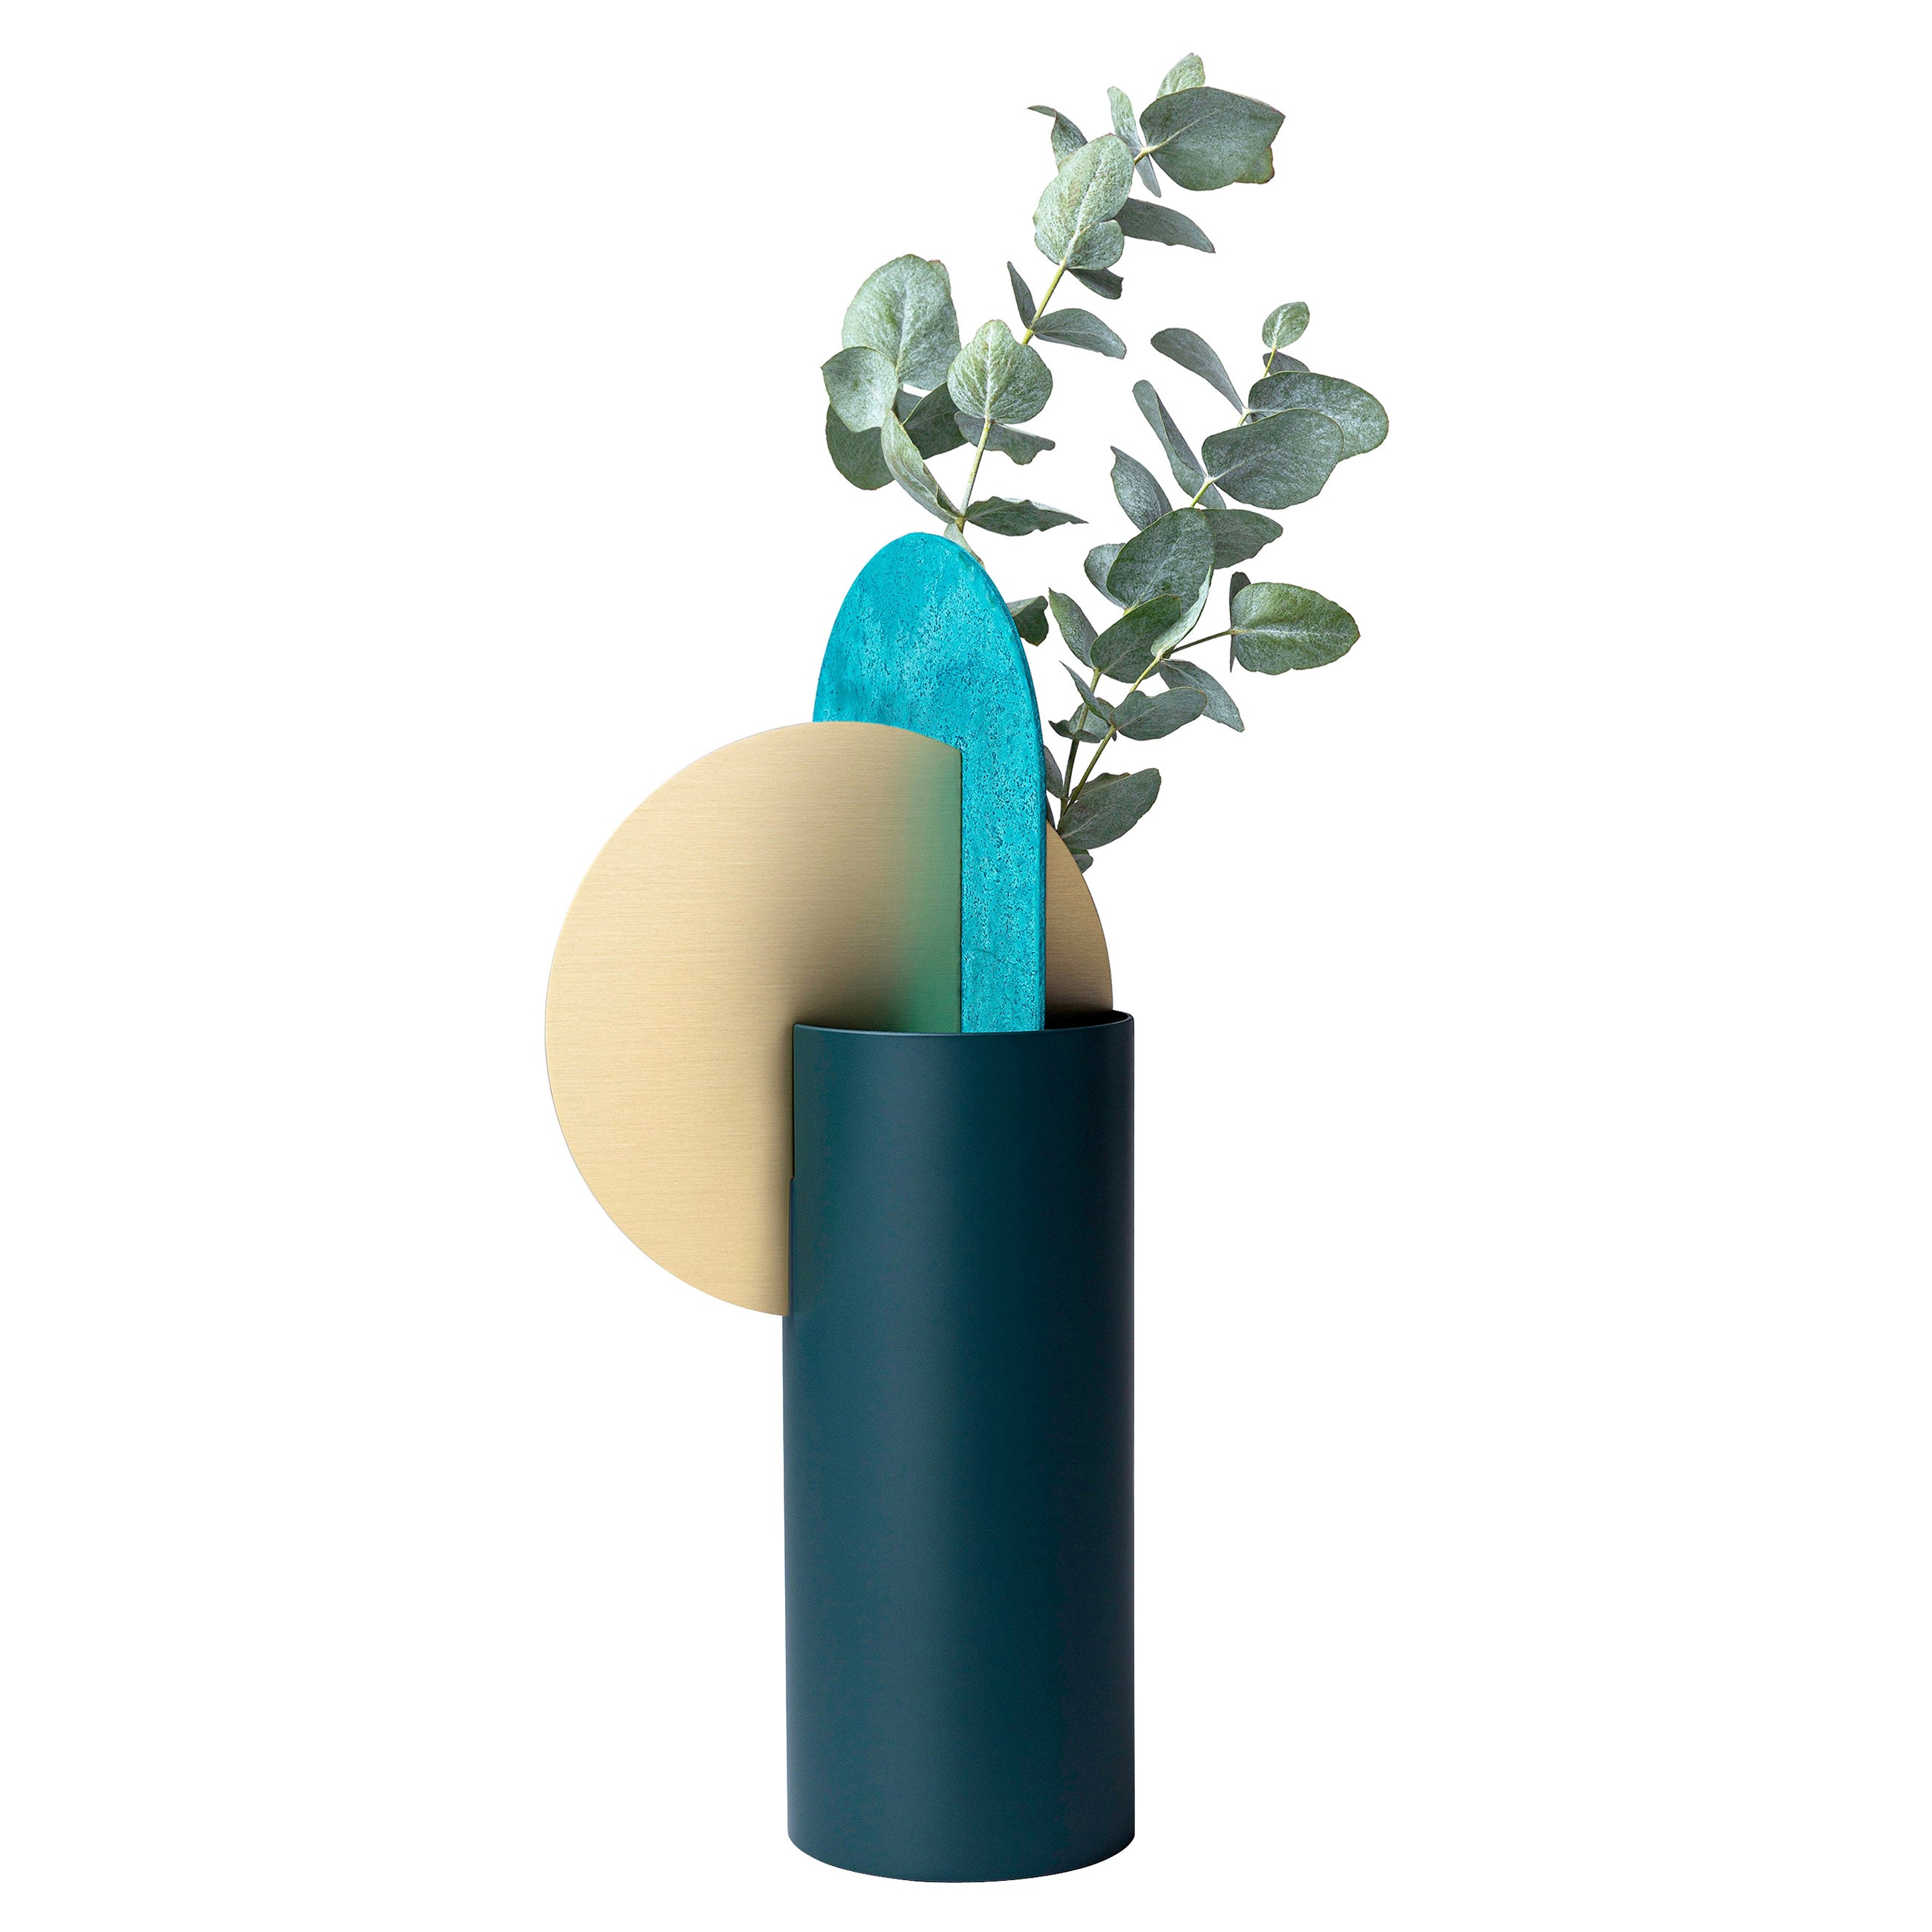 Limited Edition Modern Vase Yermilov CSL4 by NOOM in Oxidized Brass and Steel